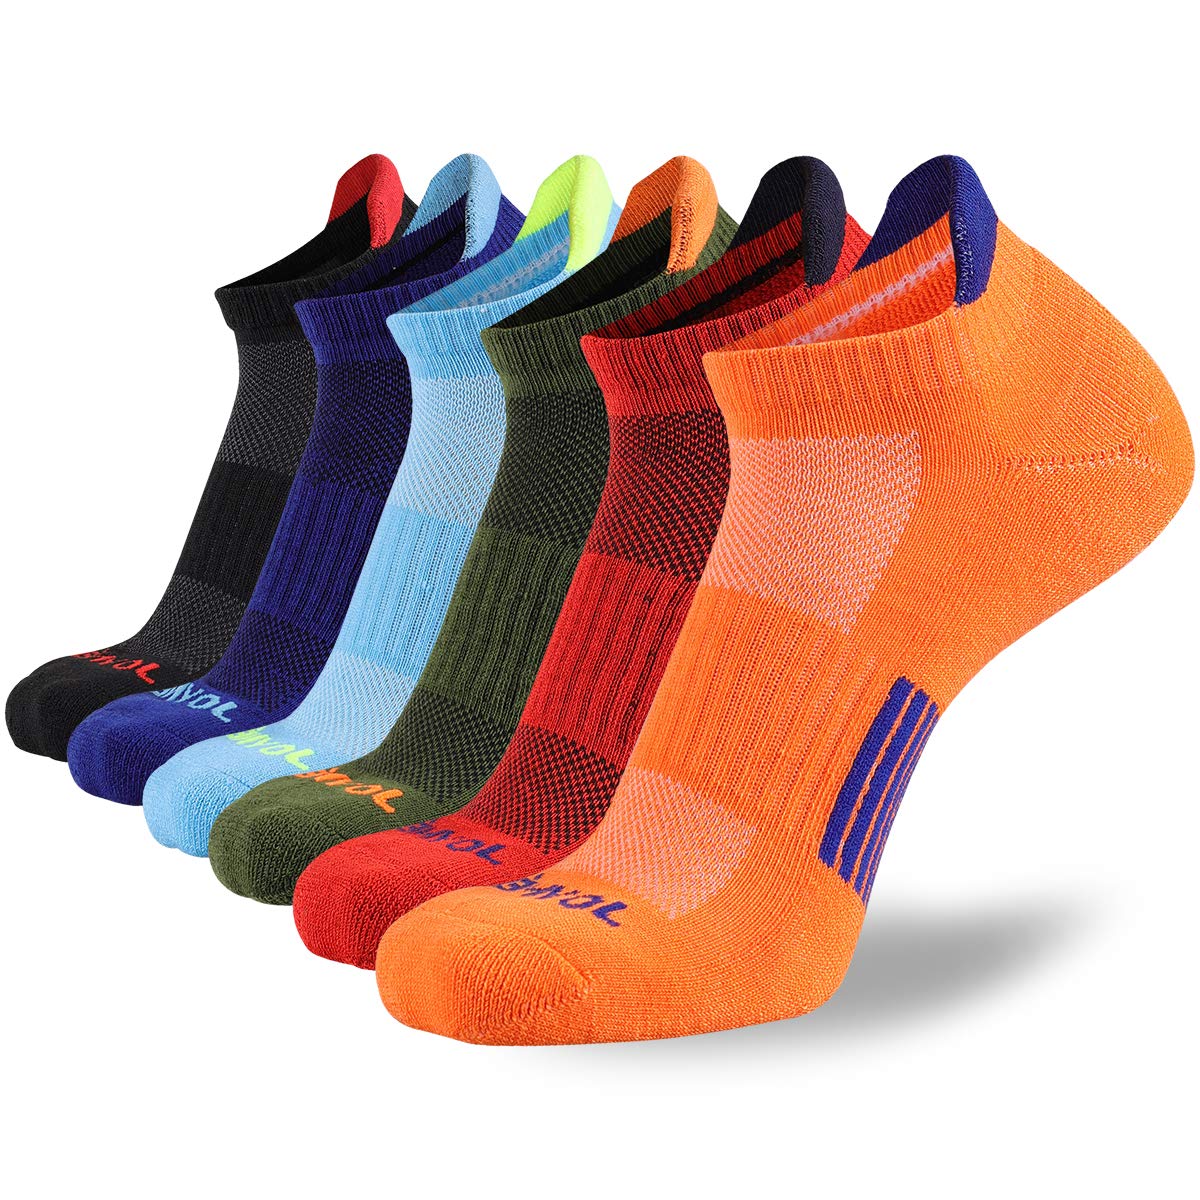 Mens Ankle Athletic Low Cut Socks Running Sports Cushioned Sock for Men 6 Pack